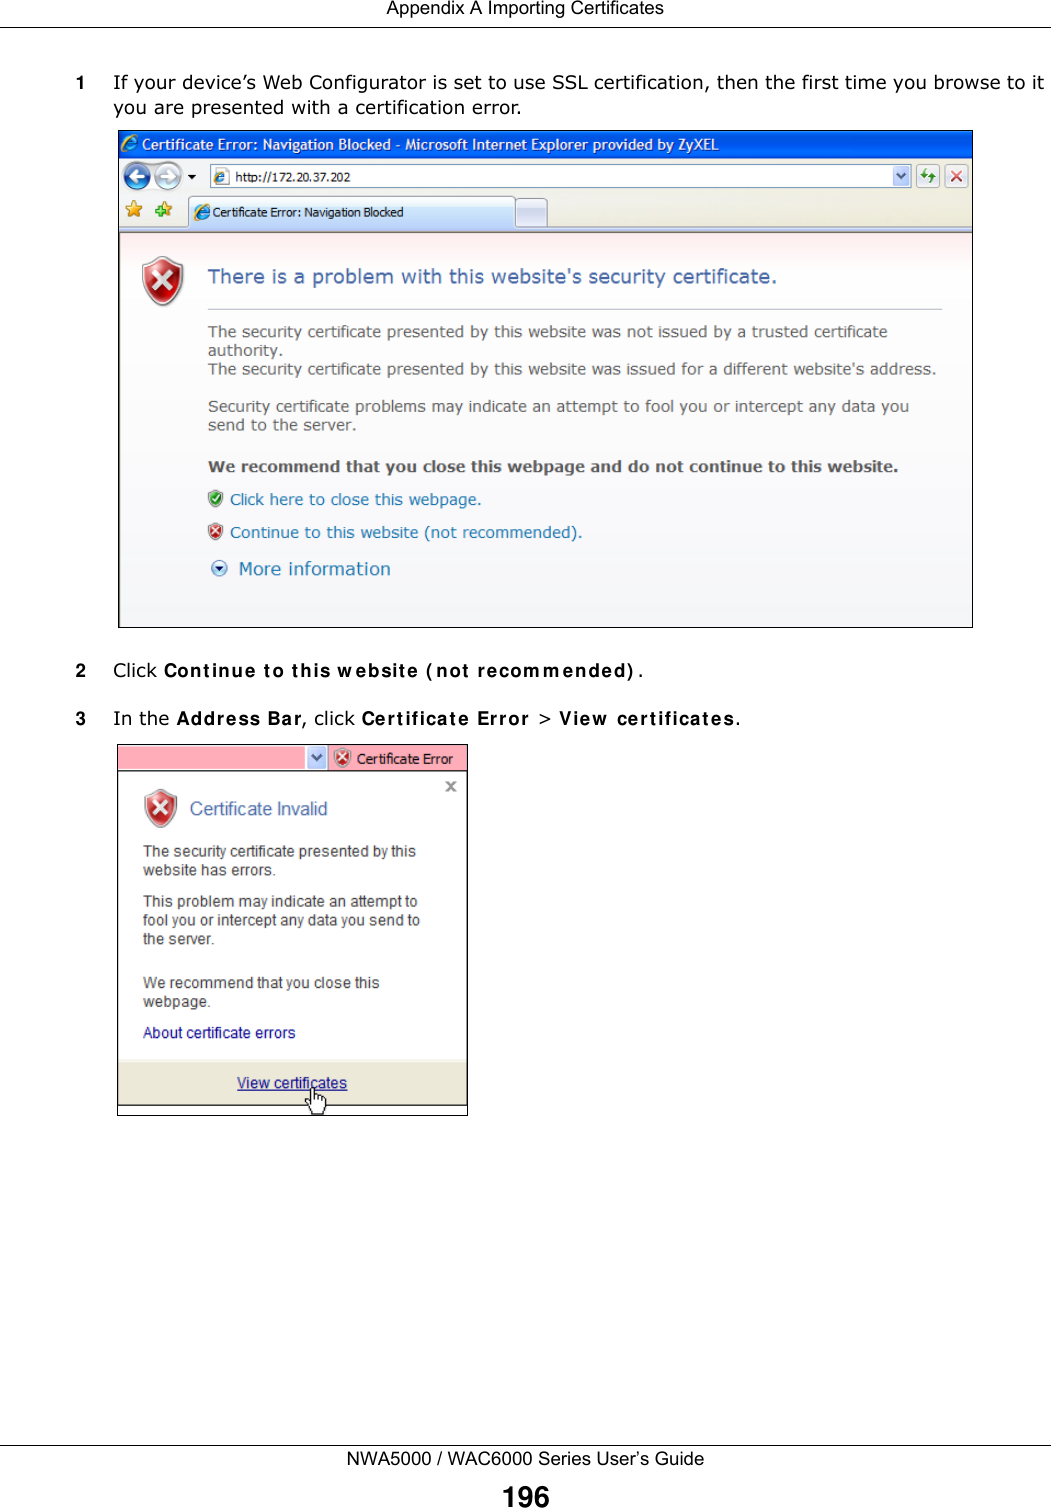 Appendix A Importing CertificatesNWA5000 / WAC6000 Series User’s Guide1961If your device’s Web Configurator is set to use SSL certification, then the first time you browse to it you are presented with a certification error.2Click Cont in ue to t his w e bsite  ( n ot recom m e nded) .3In the Addre ss Ba r, click Ce rt ificat e Er ror &gt; View  ce rt ifica t es.